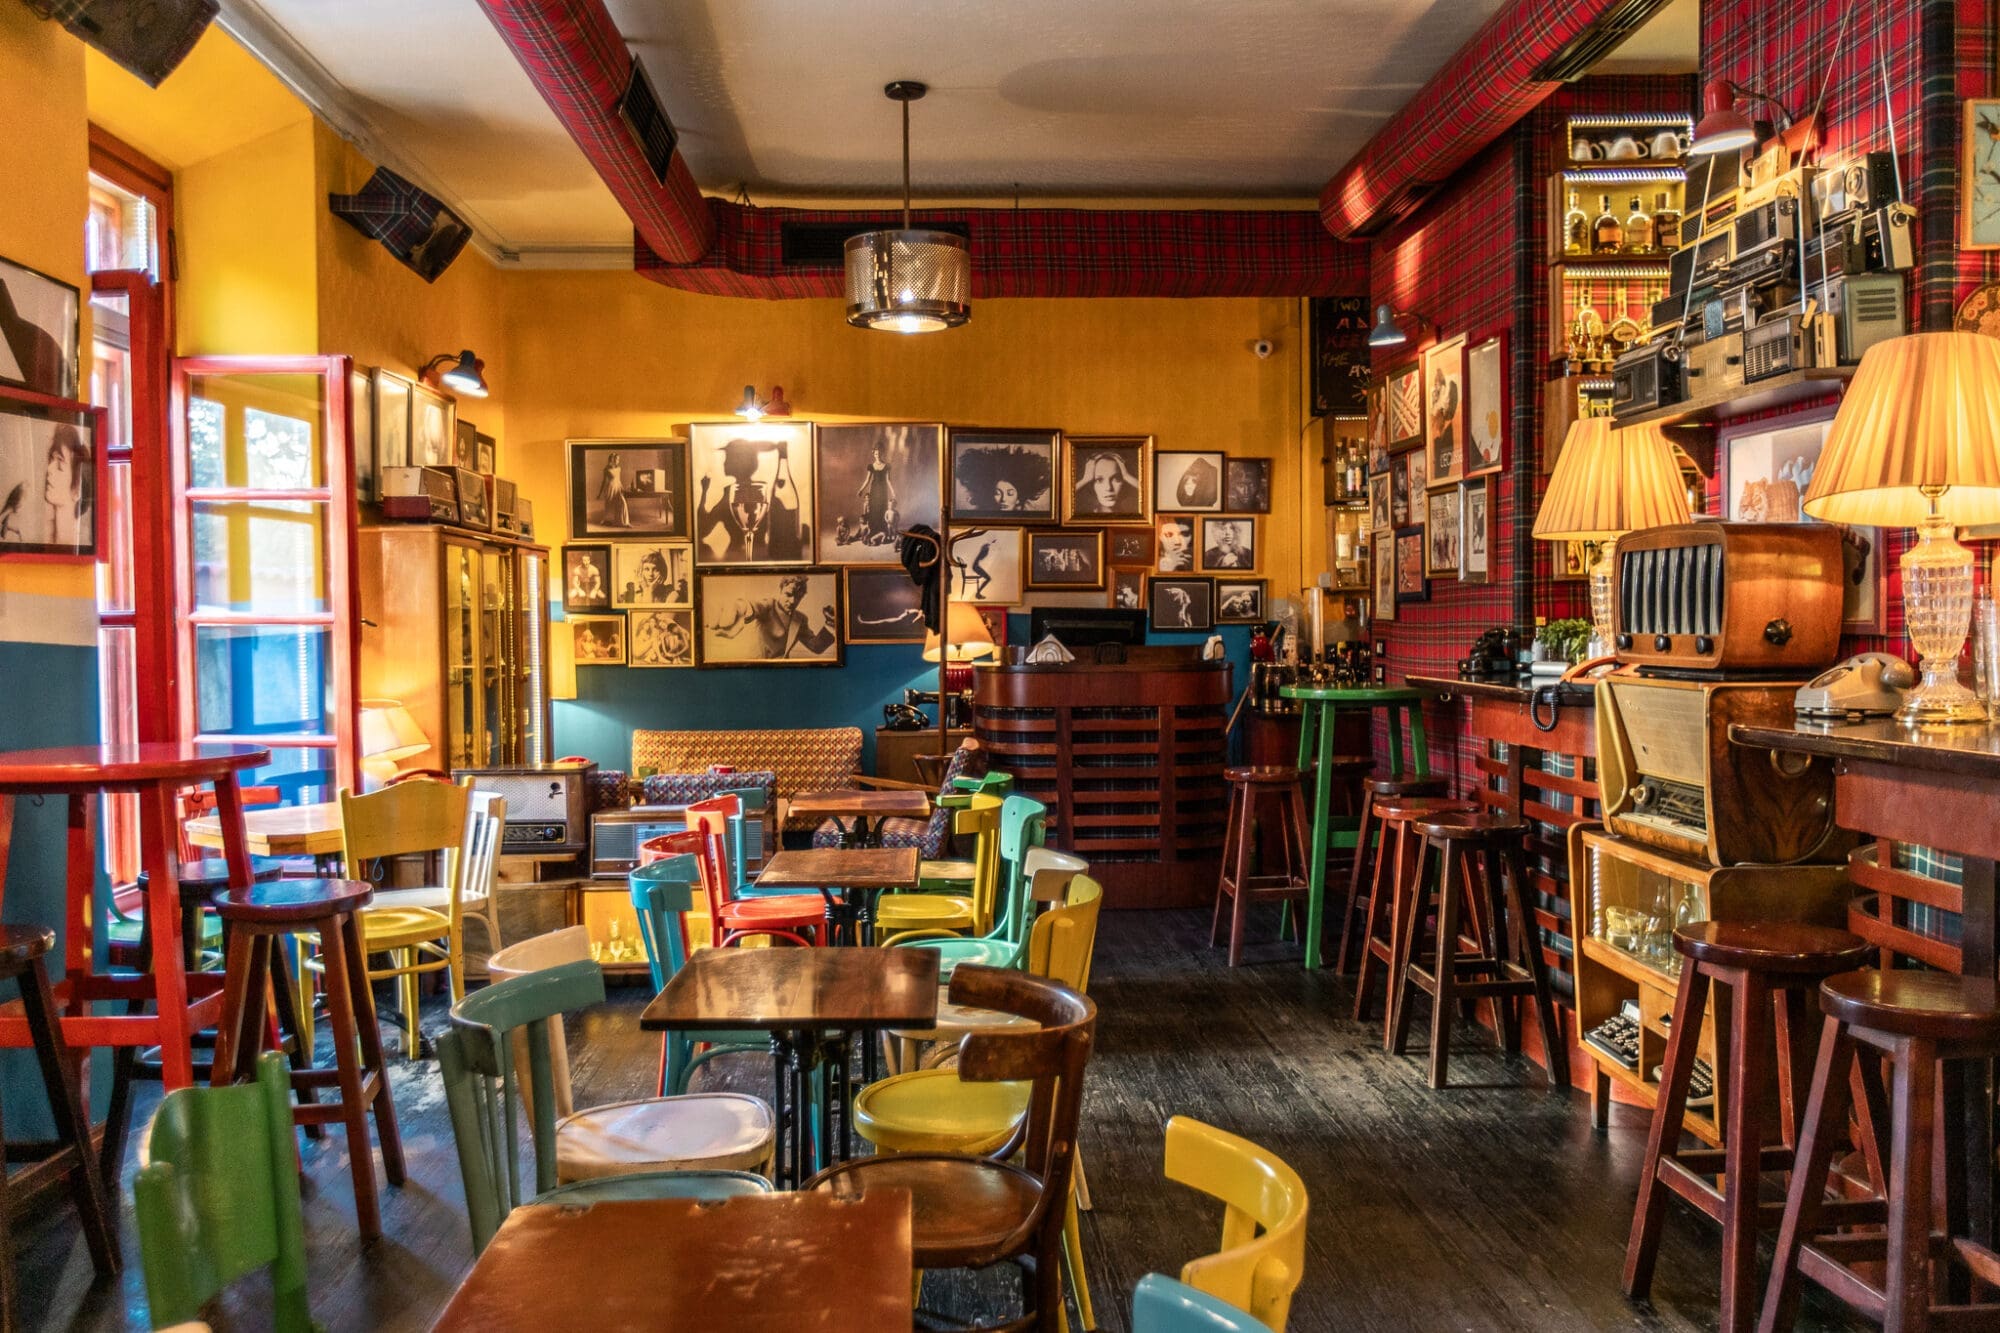 Quirky bar interior filled with coloured chairs and old radios in Tirana, Albania